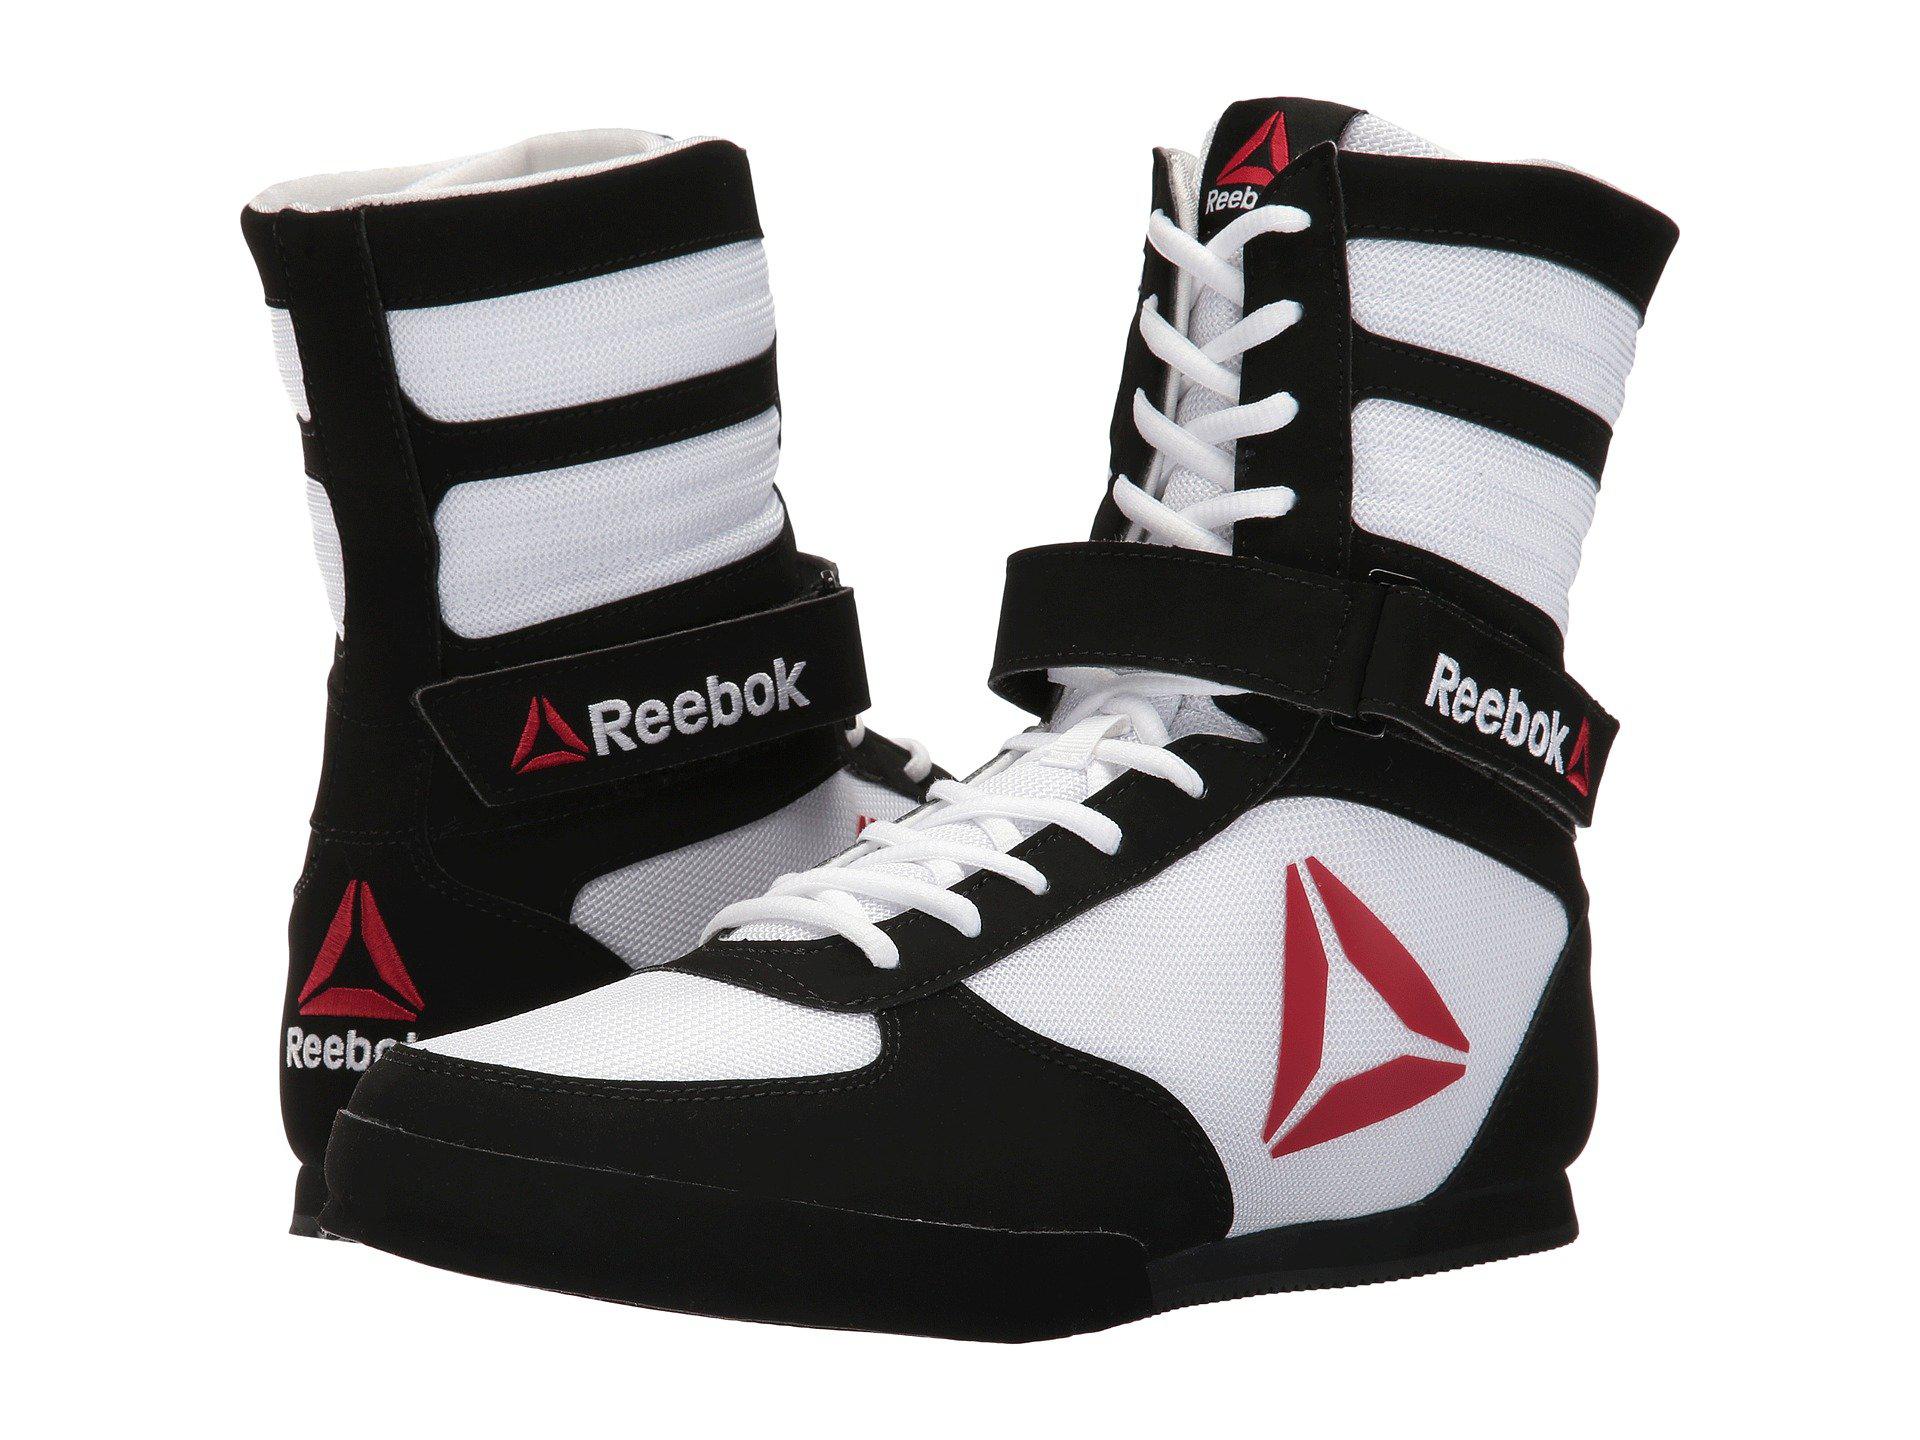 Pef oosters Trouw Reebok Boxing Boot (white/black) Men's Shoes for Men | Lyst